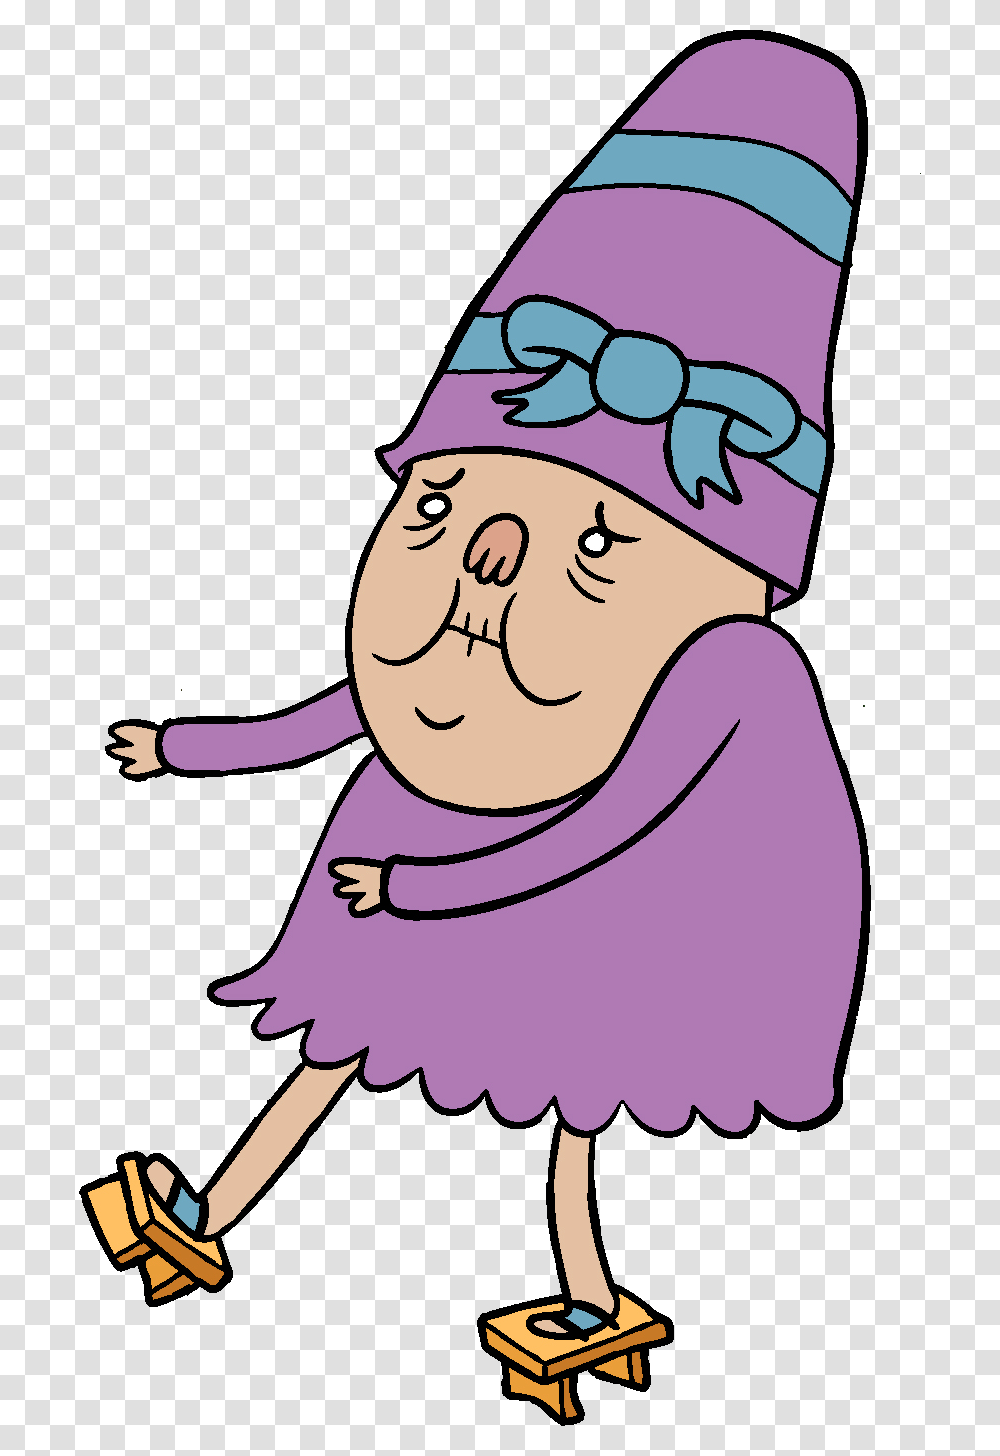 Old Clipart Old Woman Old Lady In Purple Dress, Apparel, Sunglasses, Accessories Transparent Png